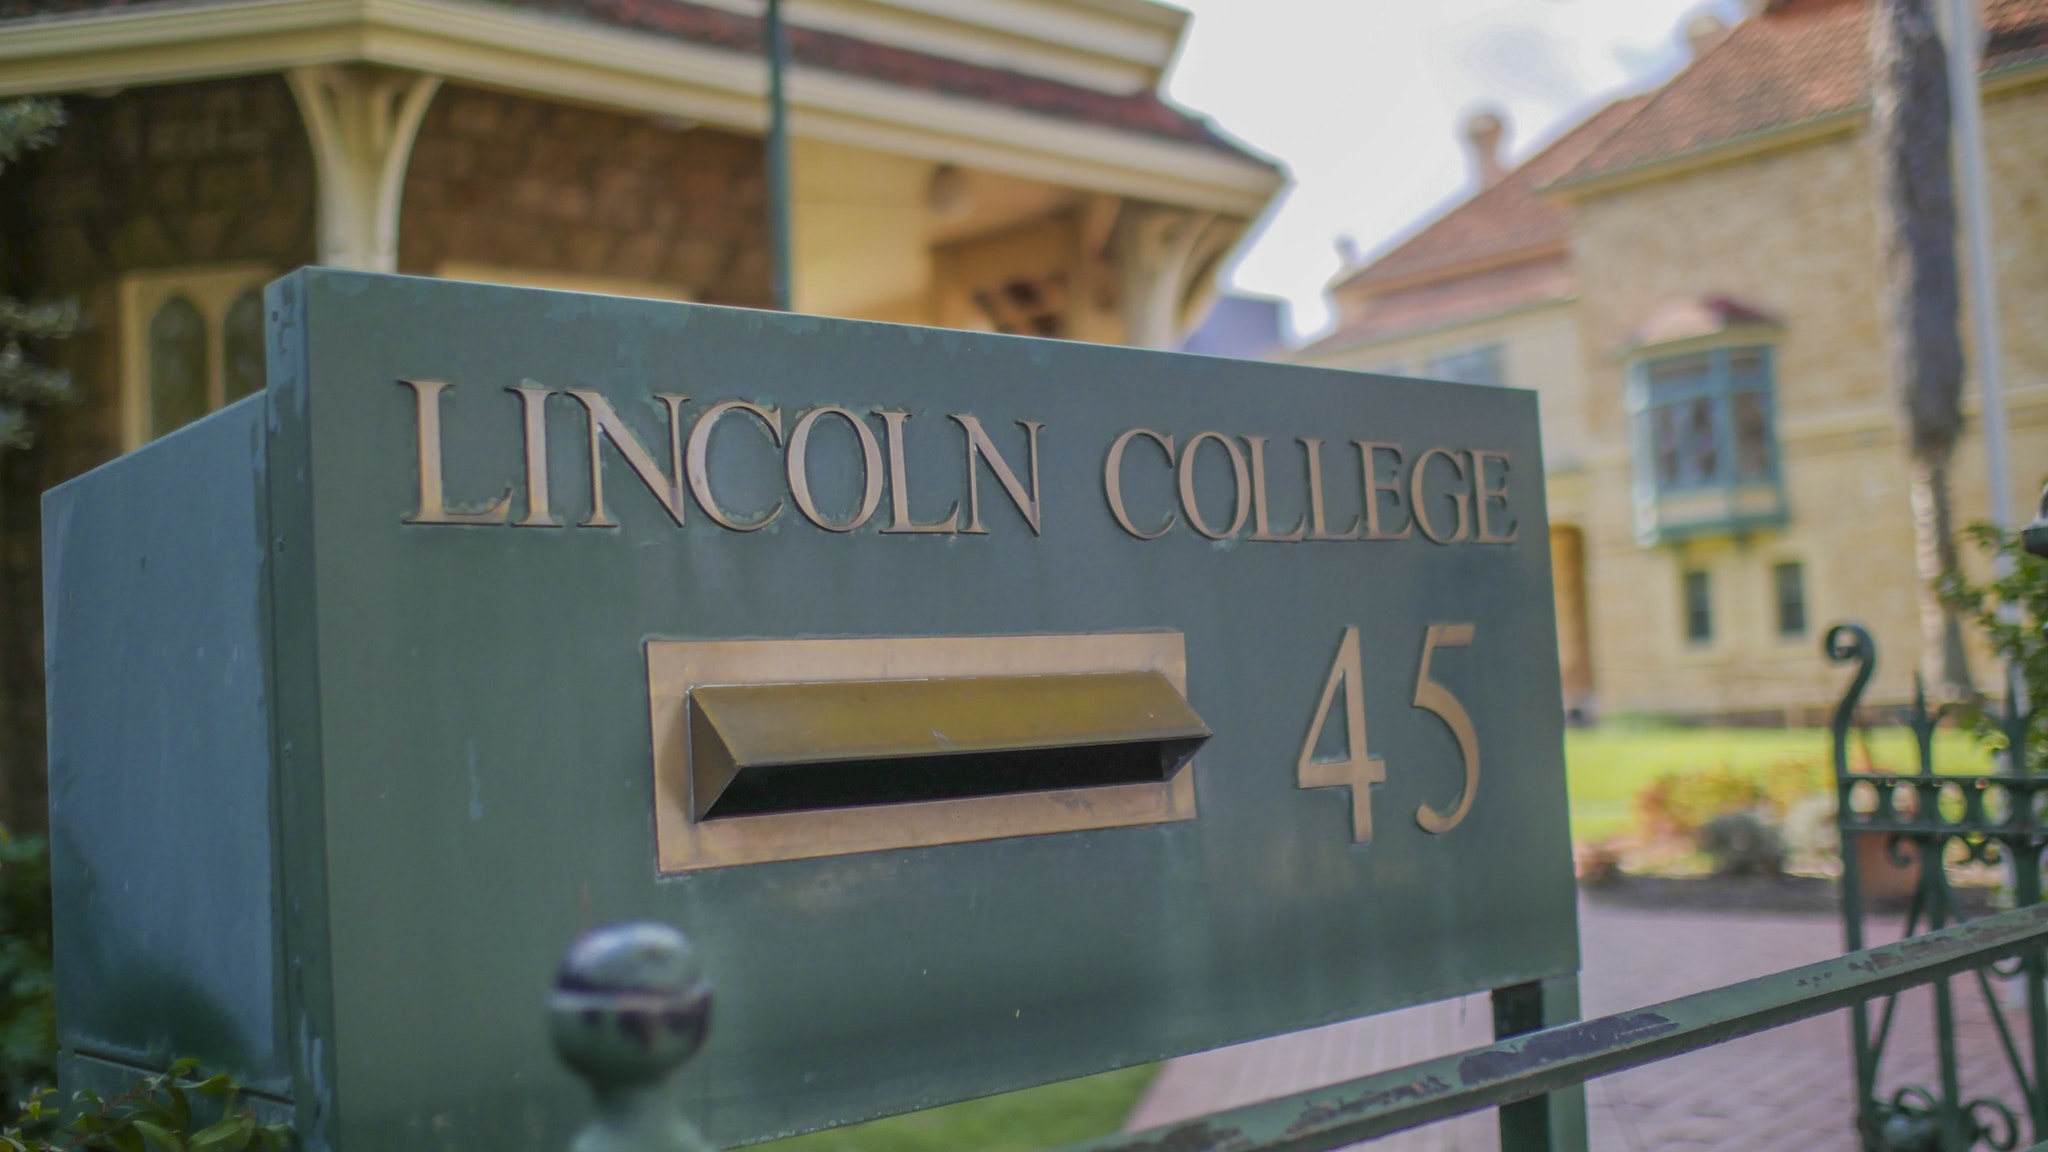 Lincoln College - Hotel Accommodation